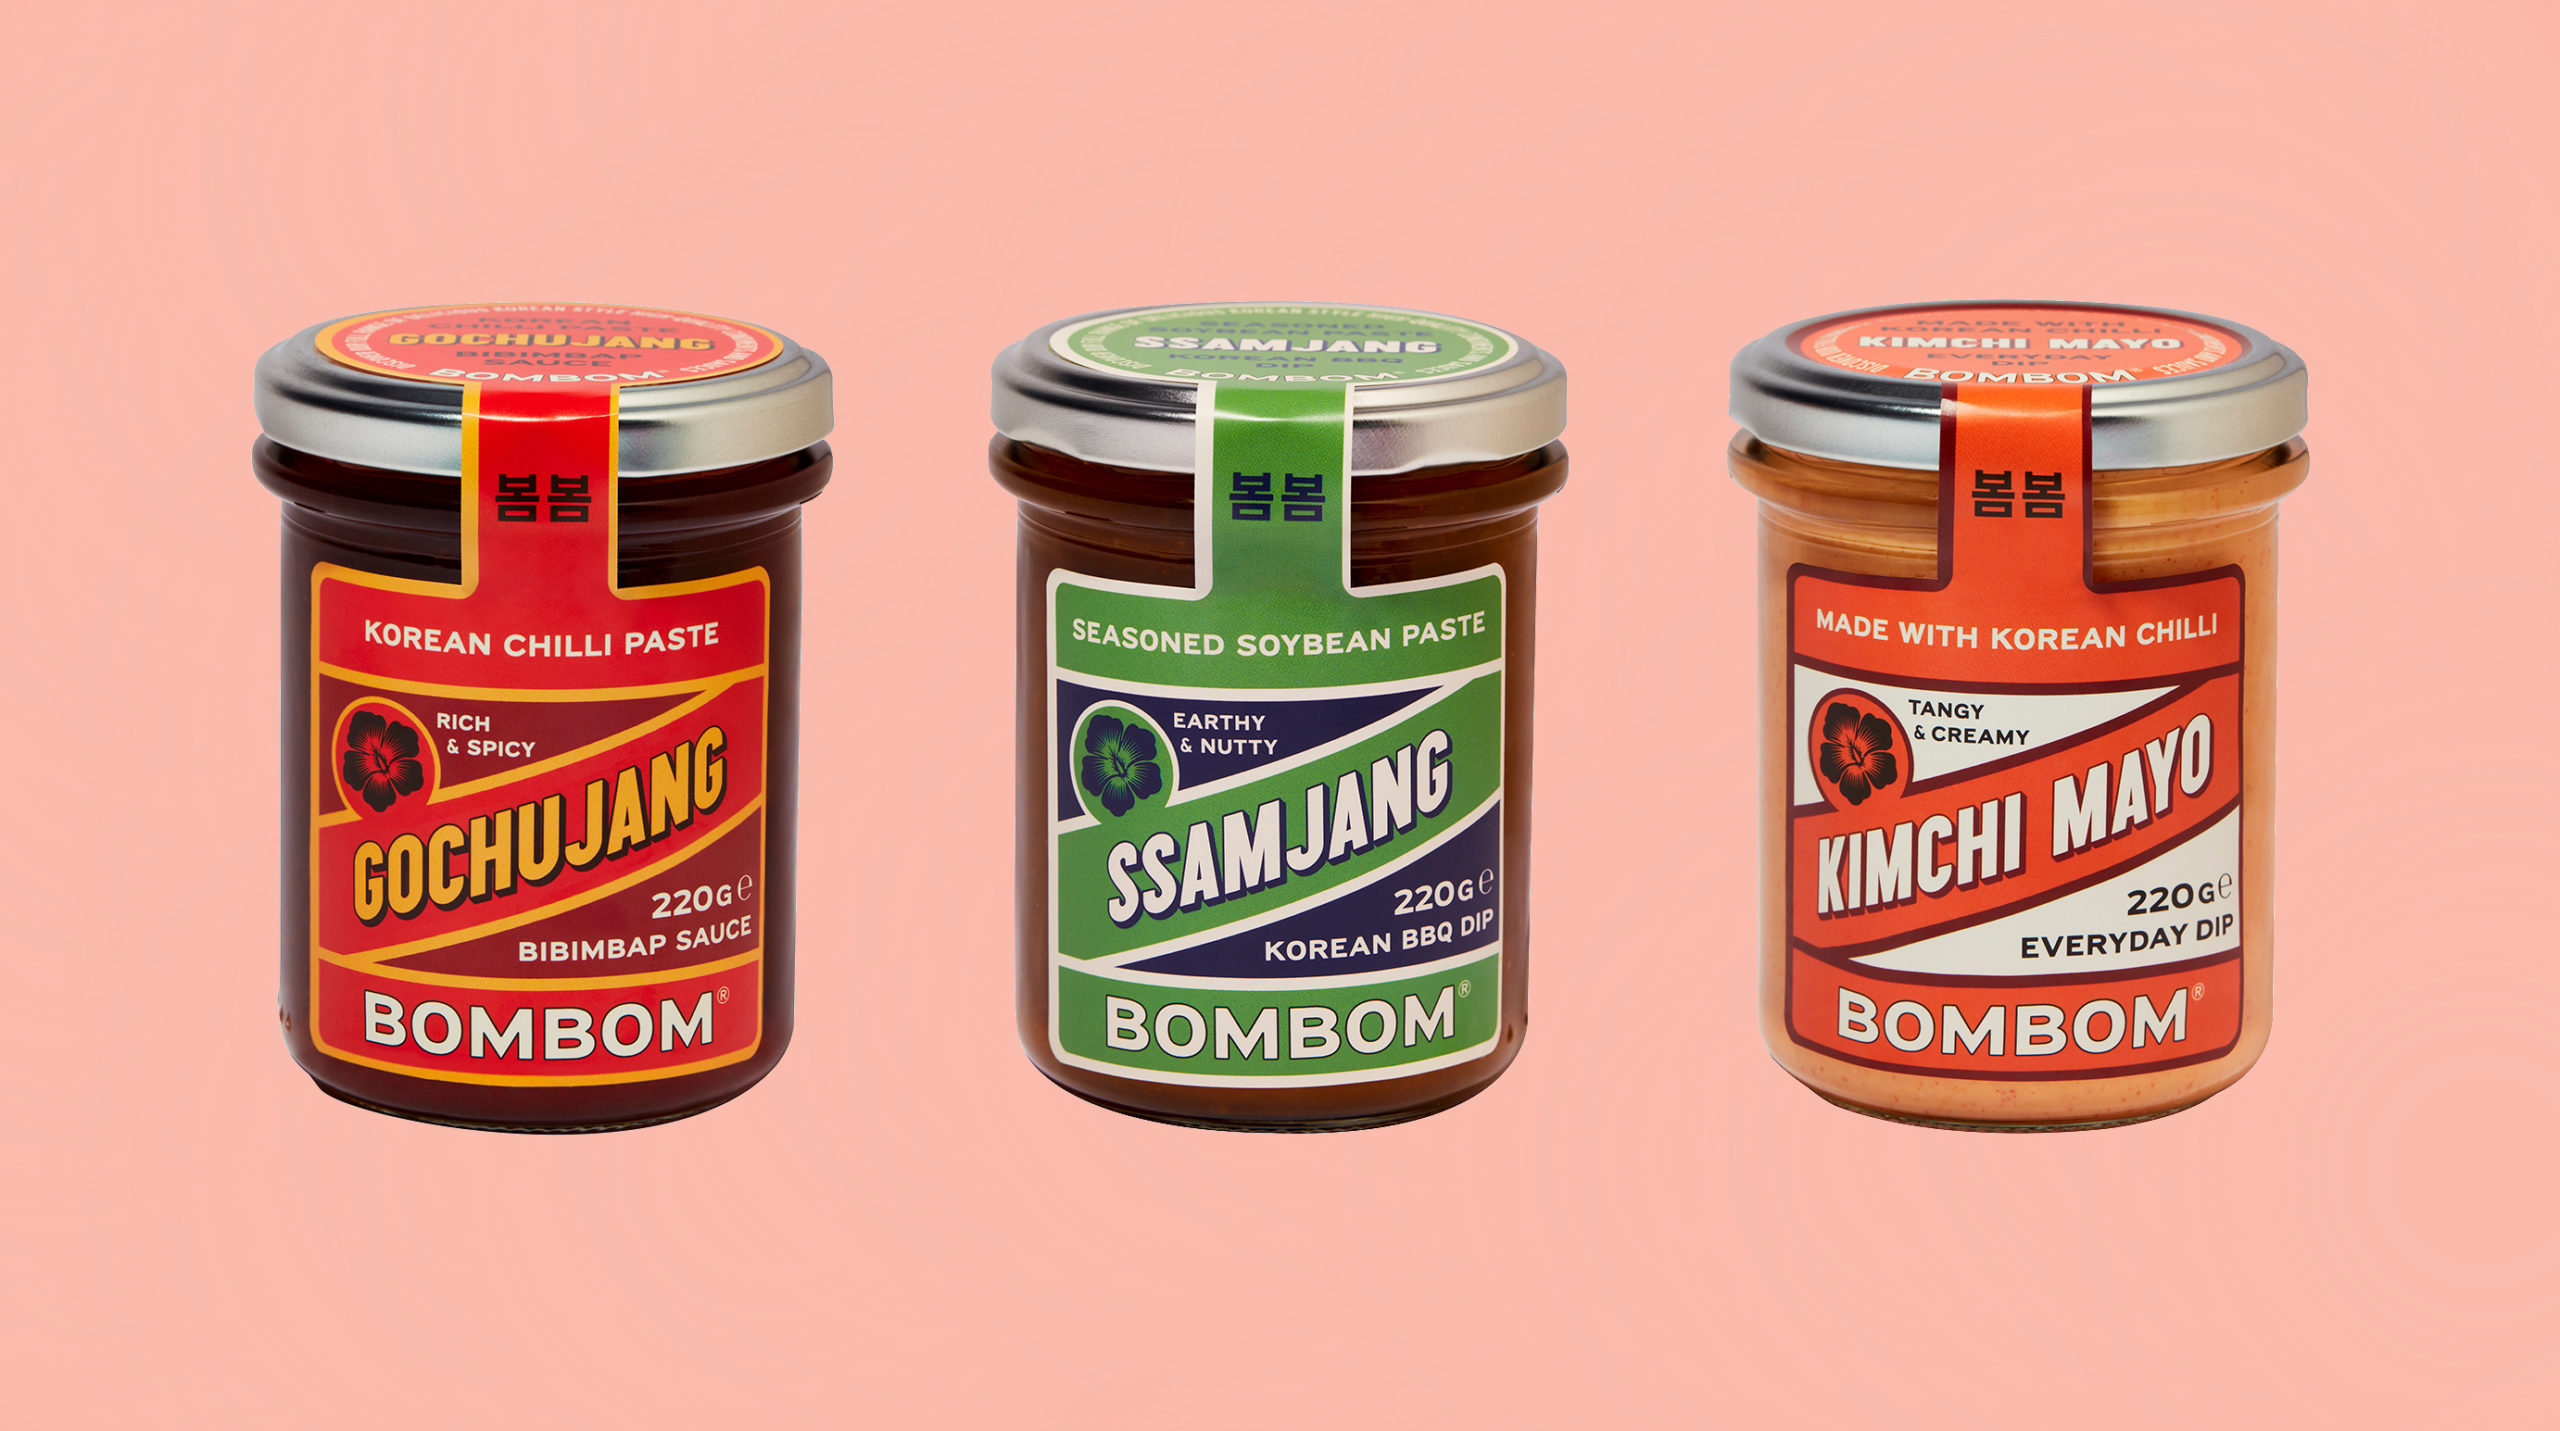 BomBom Kitchen sauces include Gochujang, Ssamjang, and Kimchi Mayo for South Korean cuisine in London